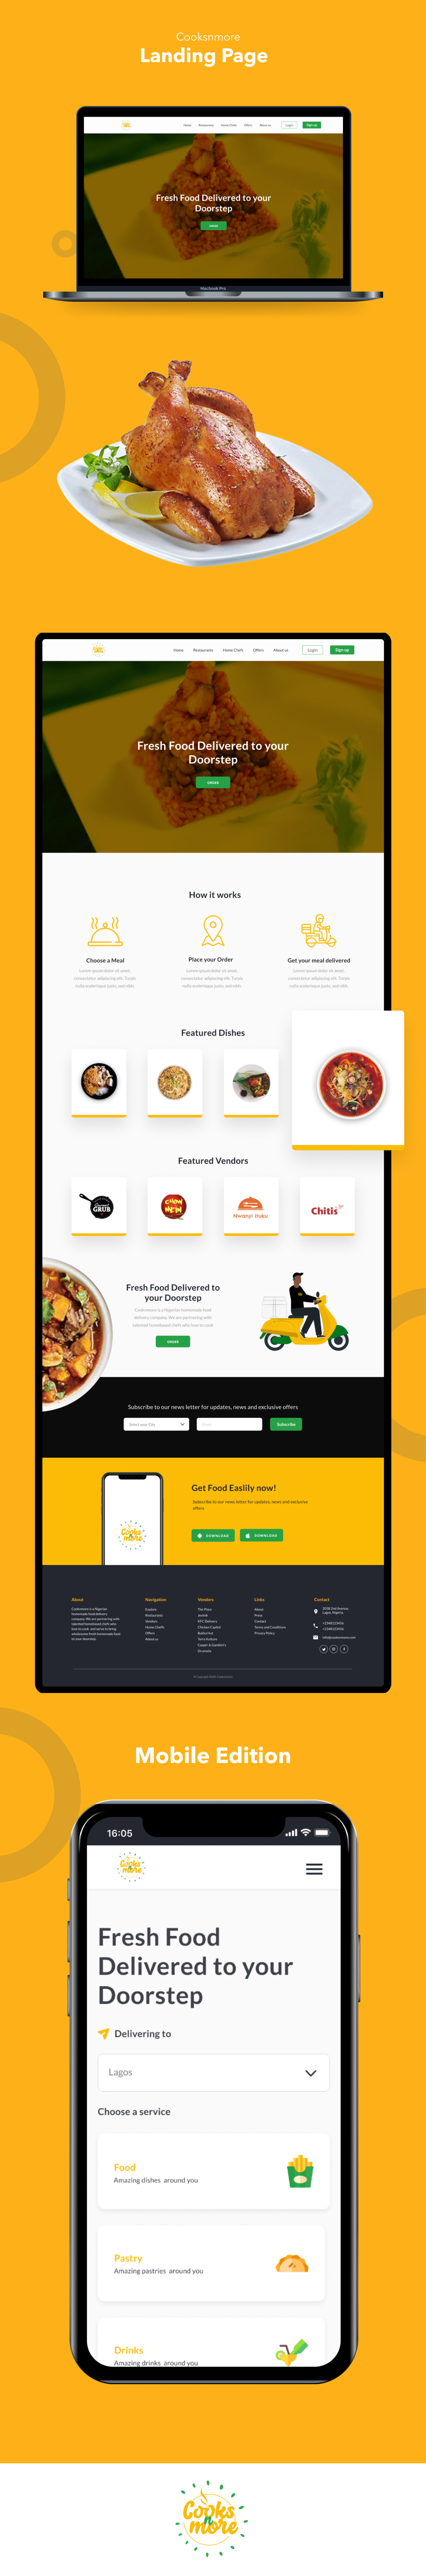 delivery landing page landing page Mobile landing page user experience user interface